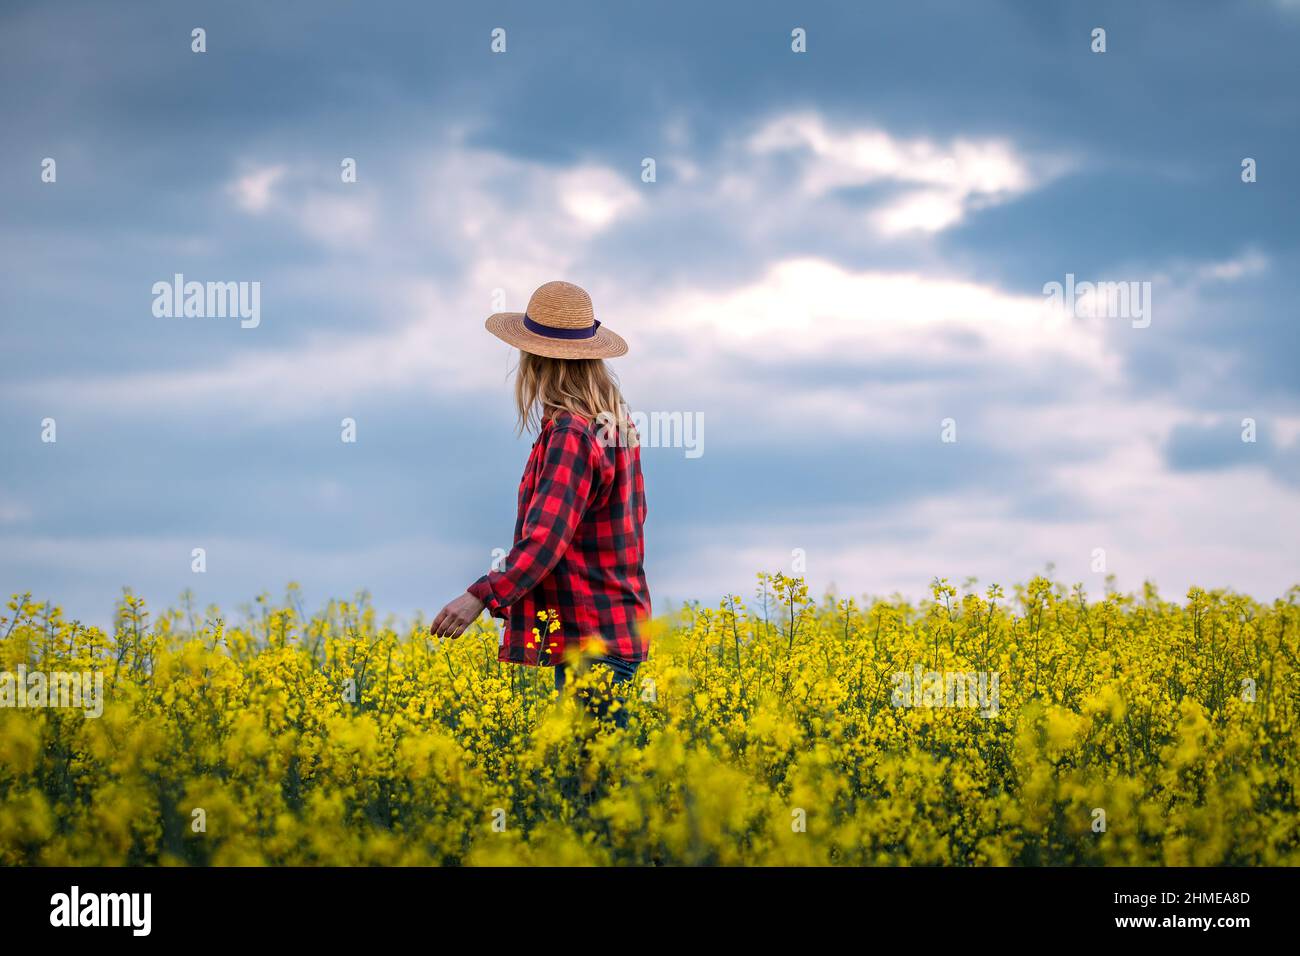 Proud farmer is looking at blooming oilseed field. Woman with straw hat and plaid shirt standing in rapeseed agricultural field Stock Photo